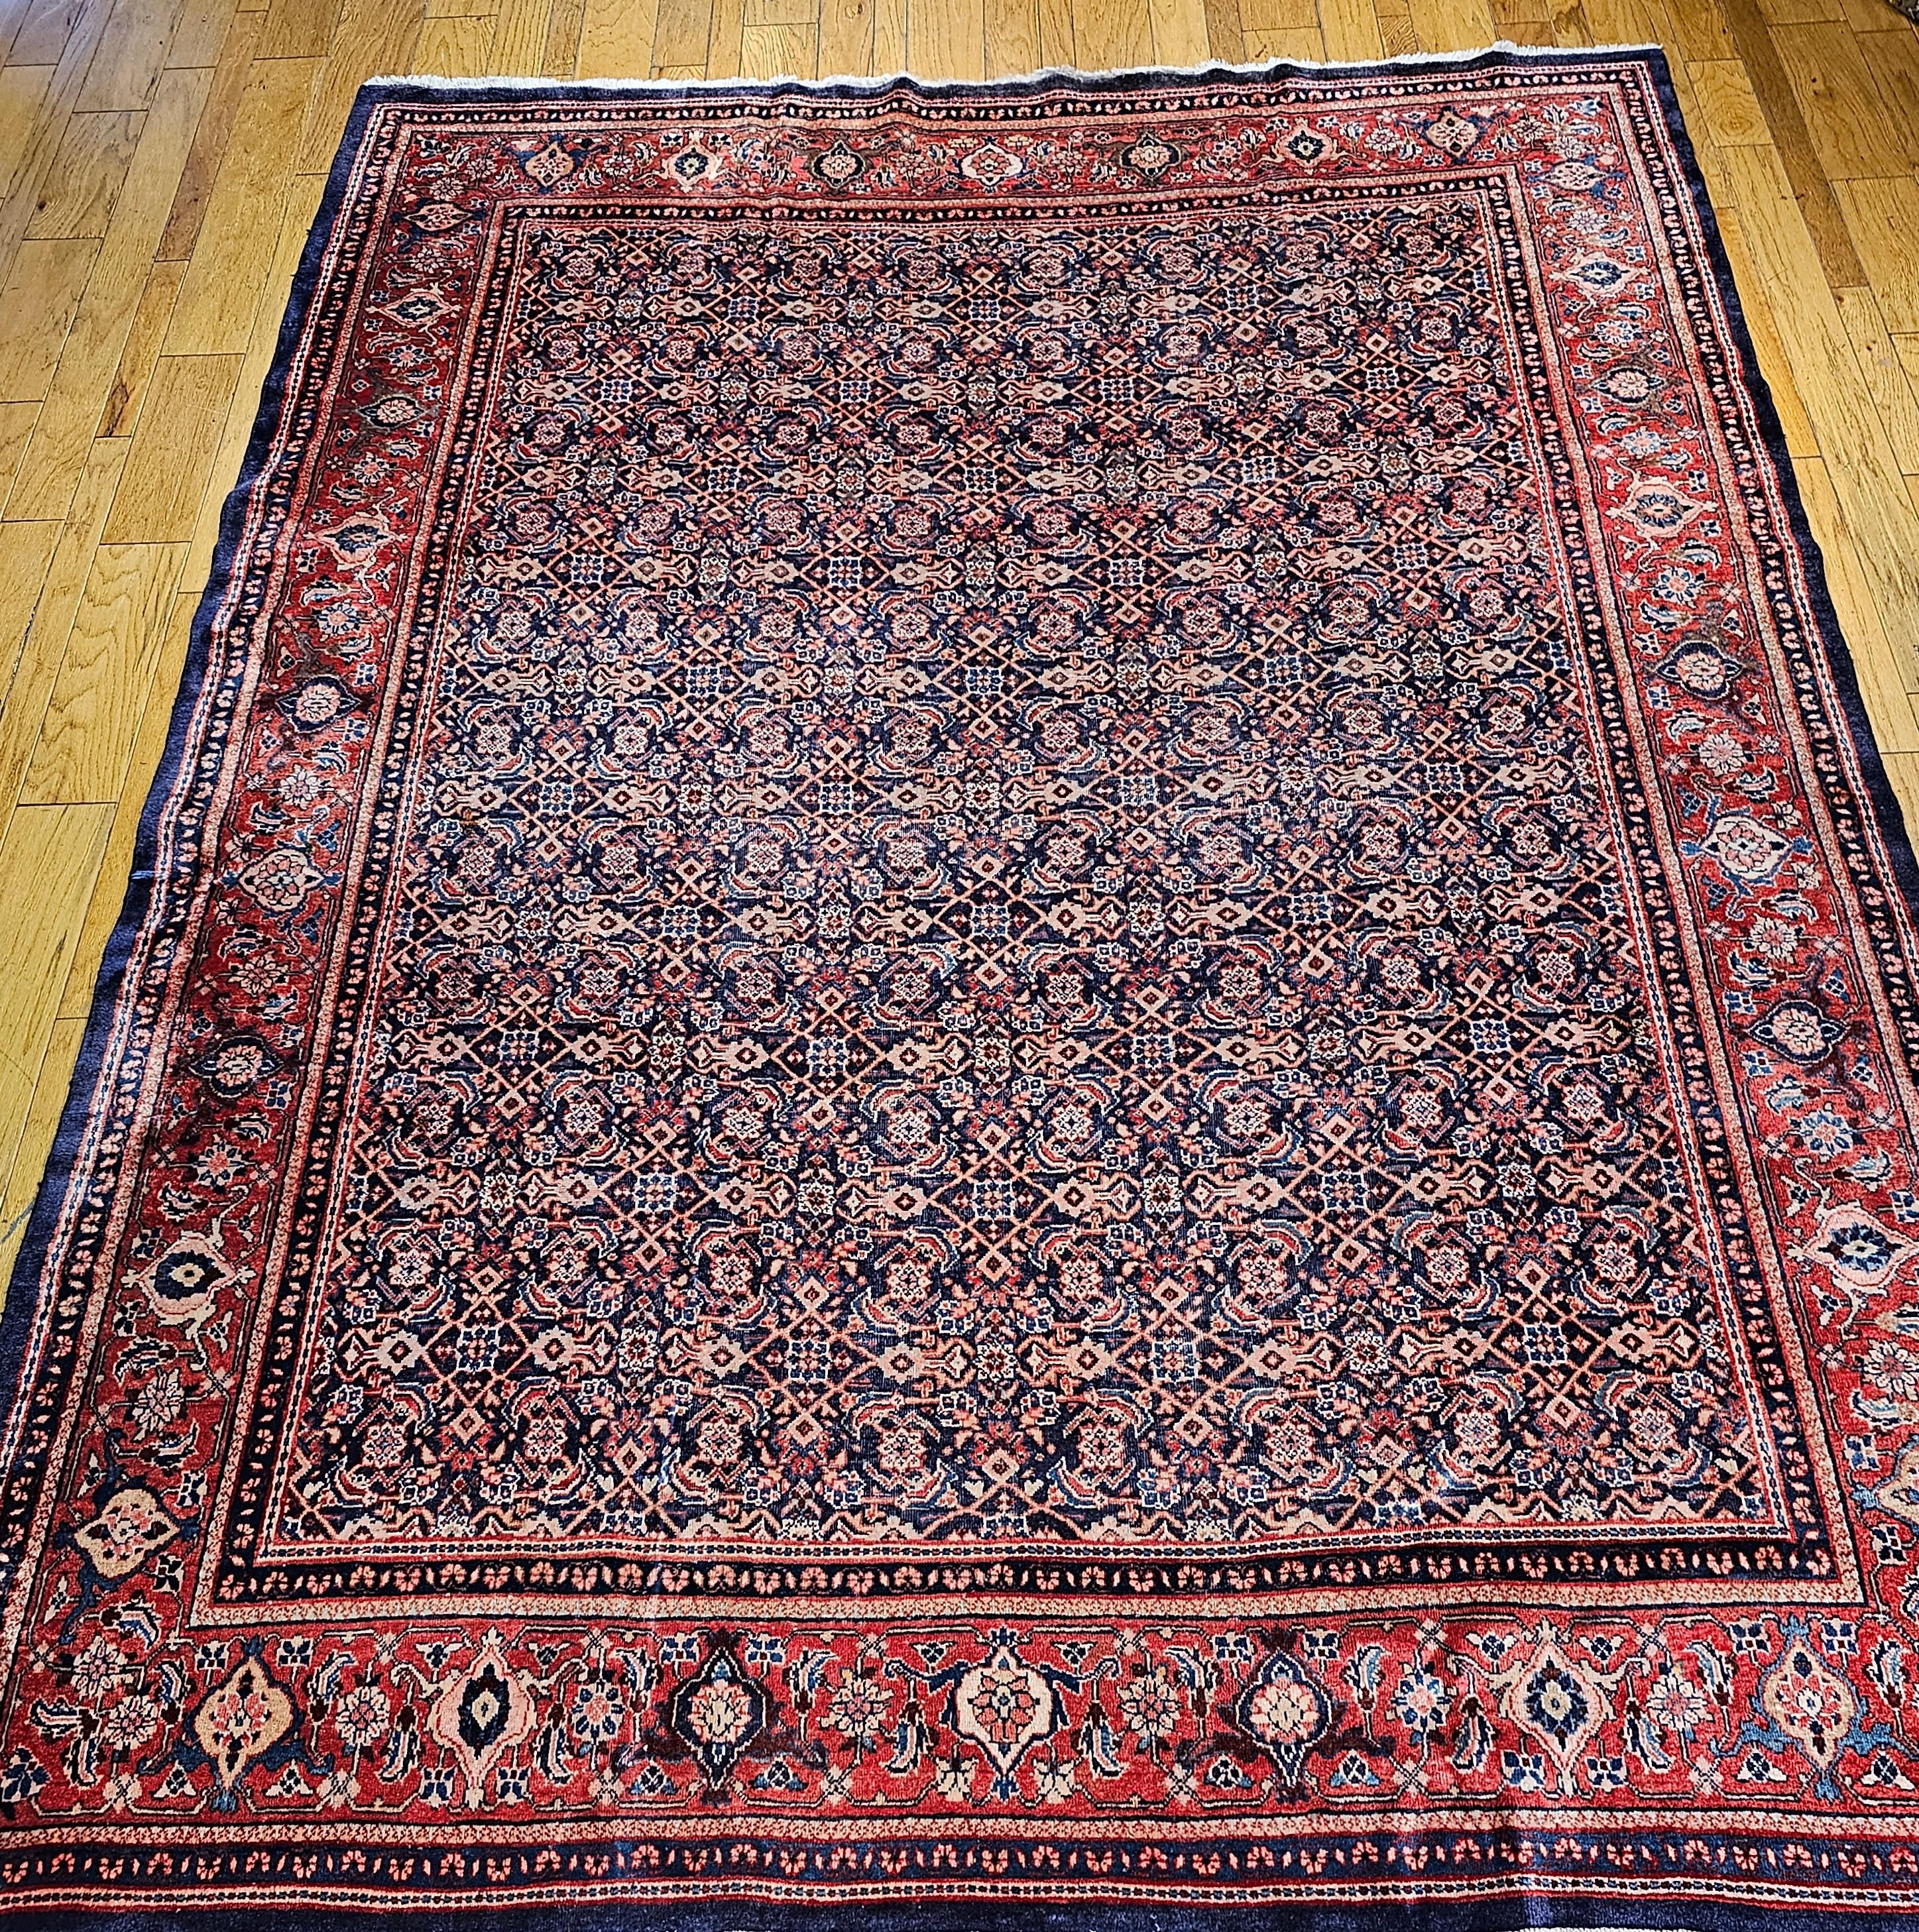 A Mahal Sultanabad rug with an 